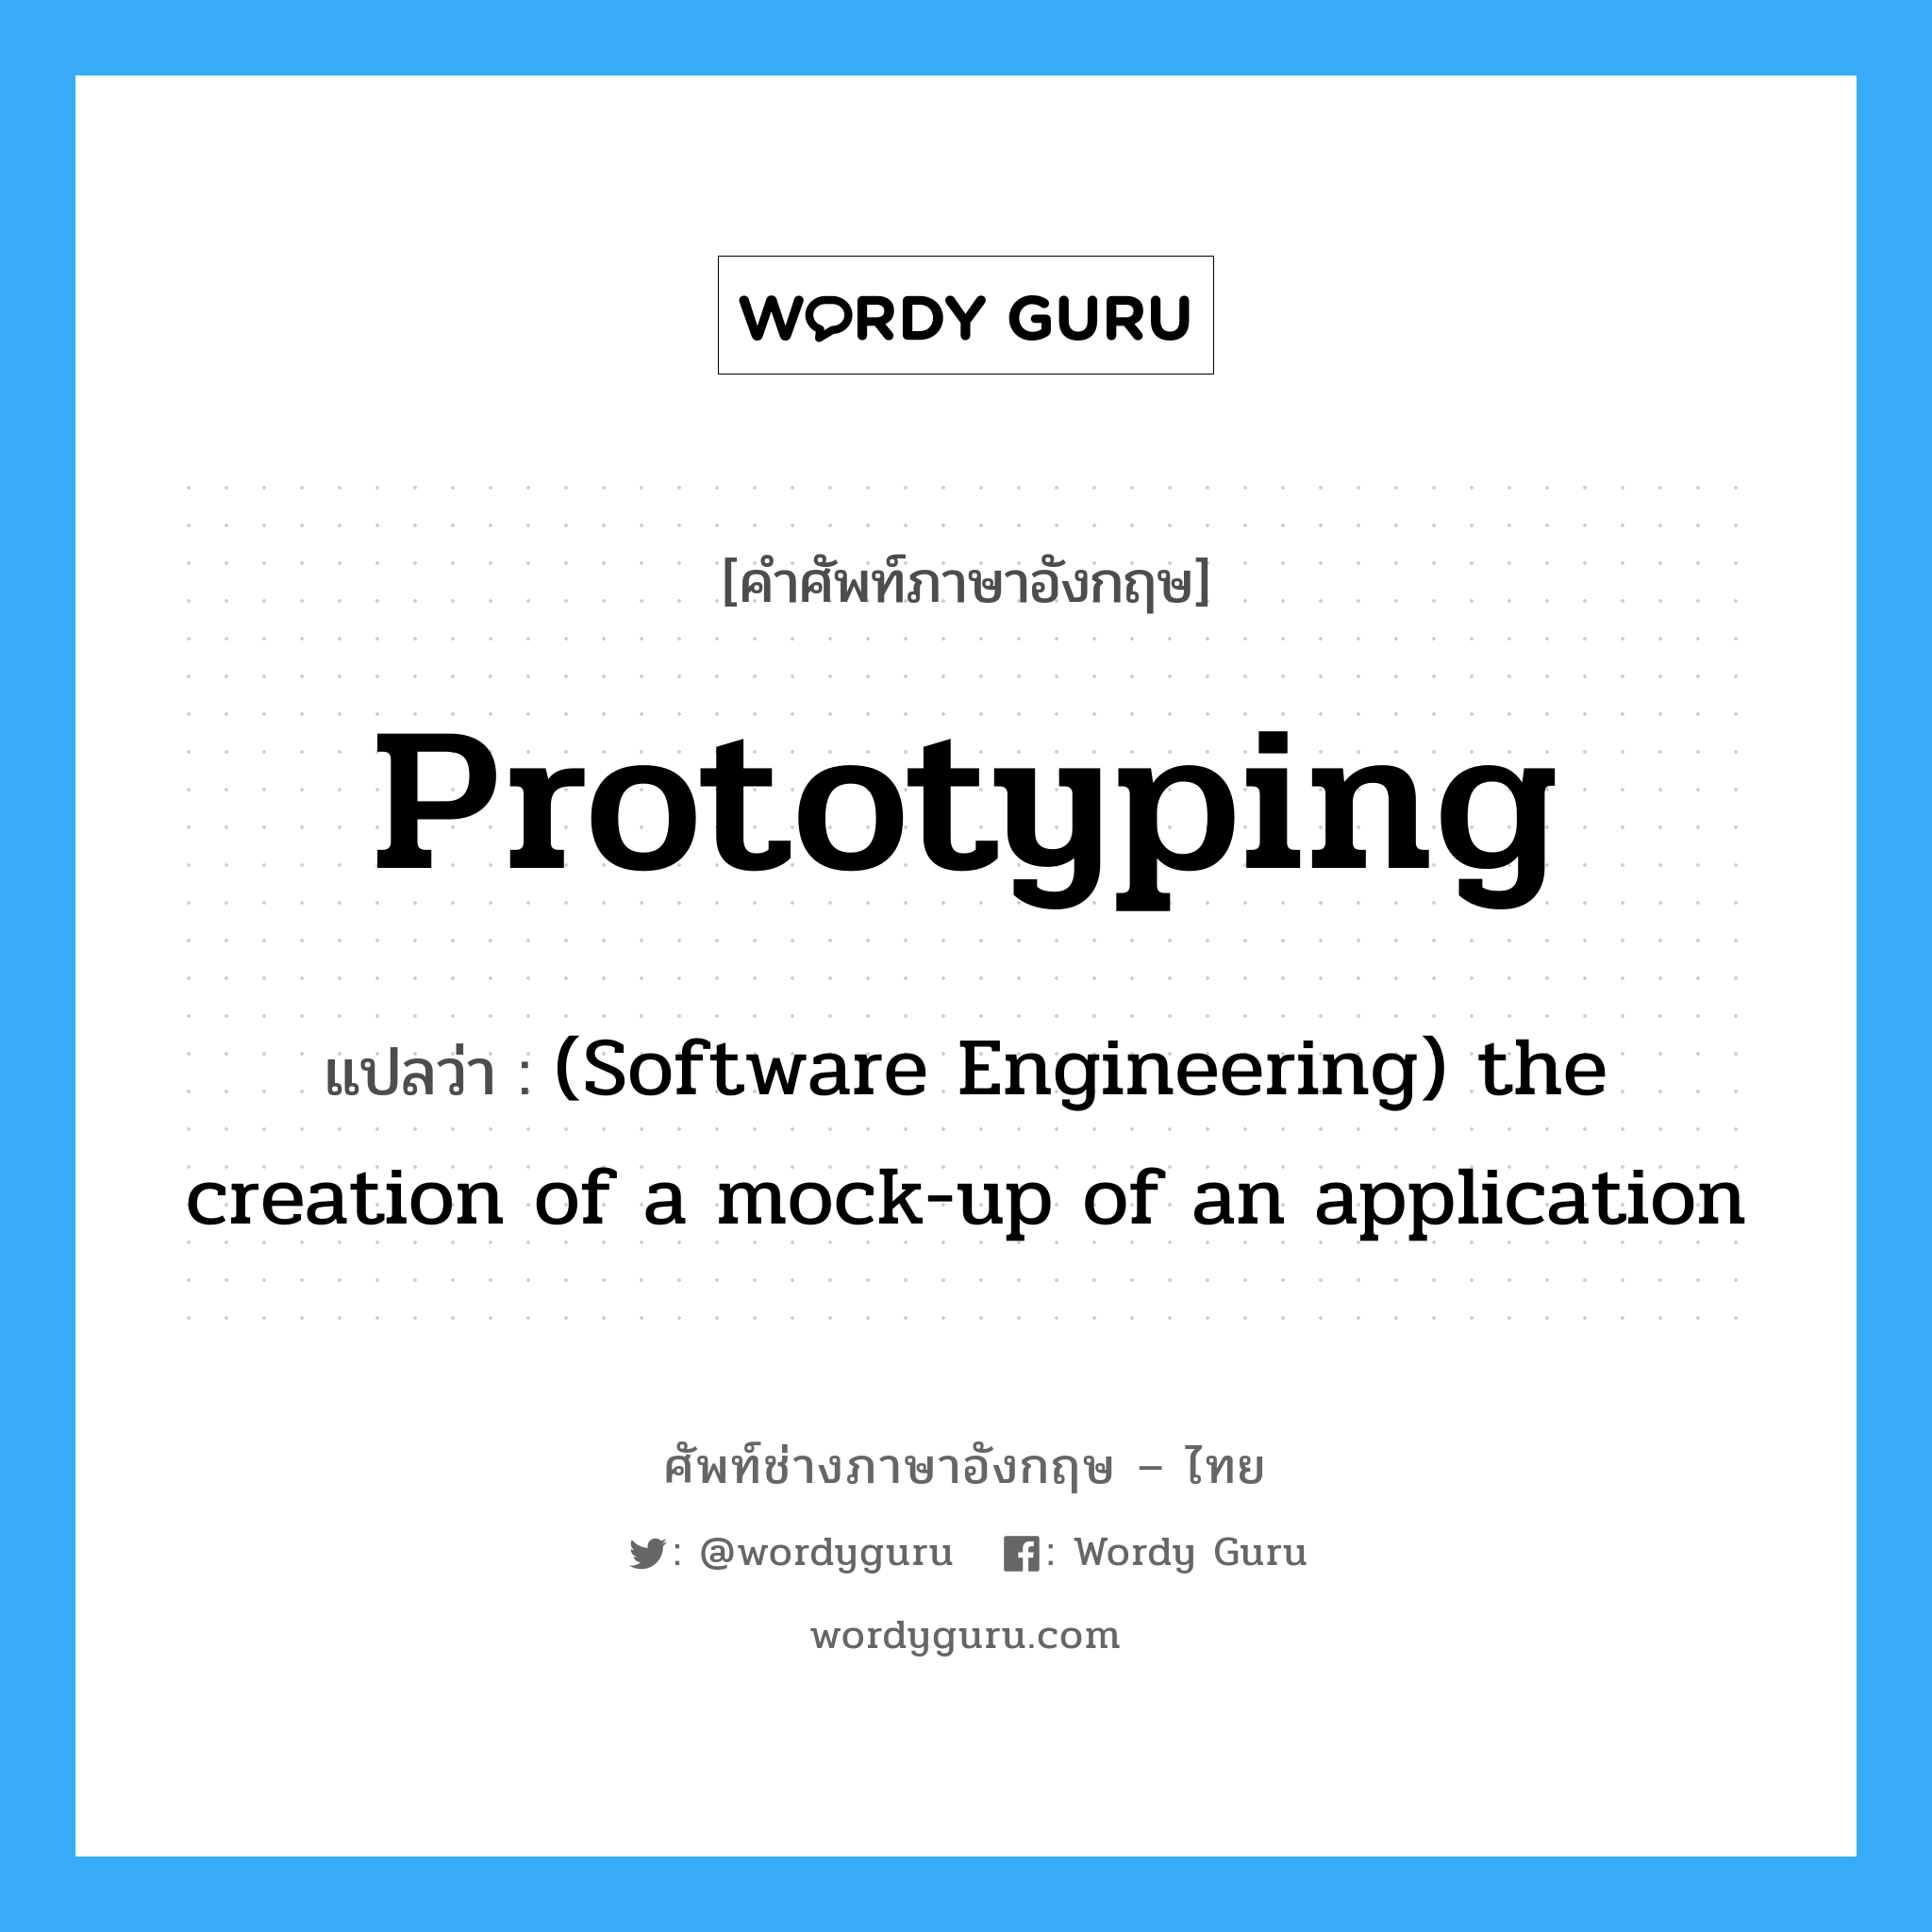 Prototyping แปลว่า?, คำศัพท์ช่างภาษาอังกฤษ - ไทย Prototyping คำศัพท์ภาษาอังกฤษ Prototyping แปลว่า (Software Engineering) the creation of a mock-up of an application